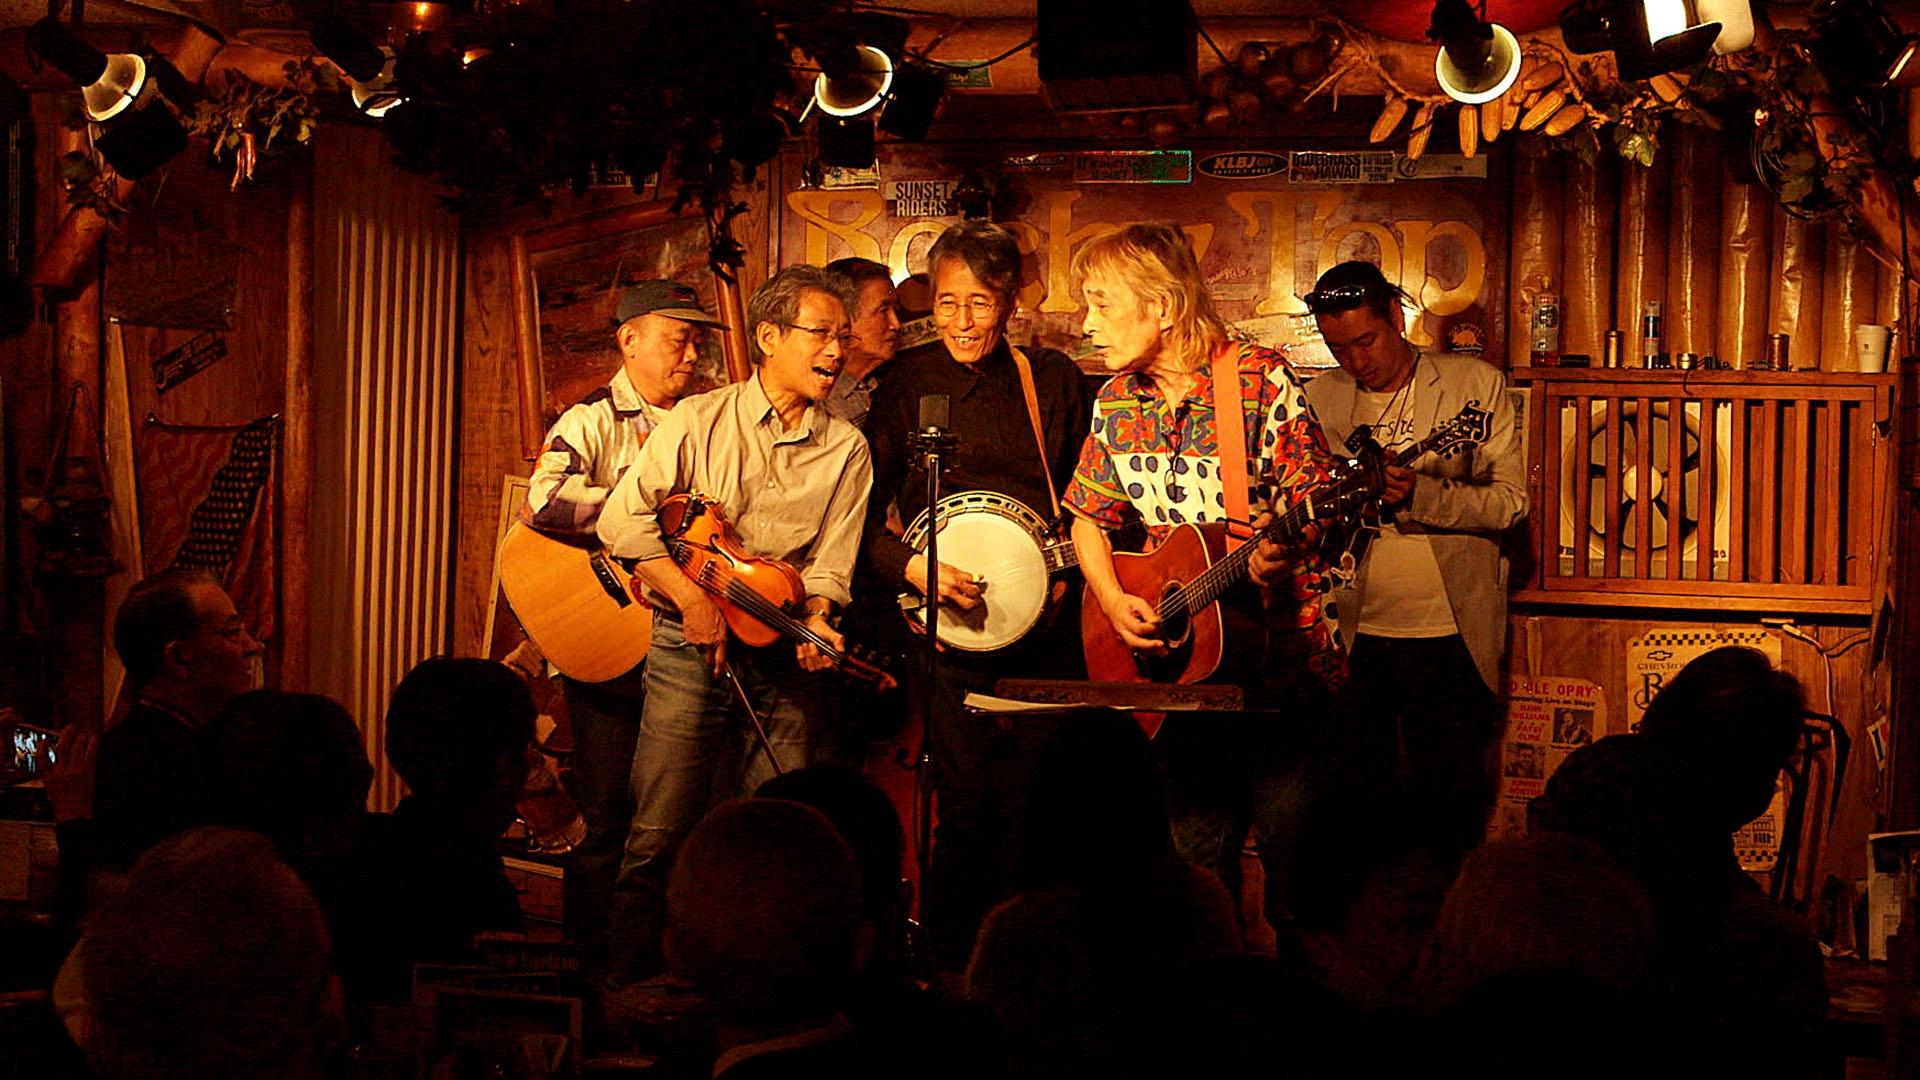 Still image of six musicians performing on stage.